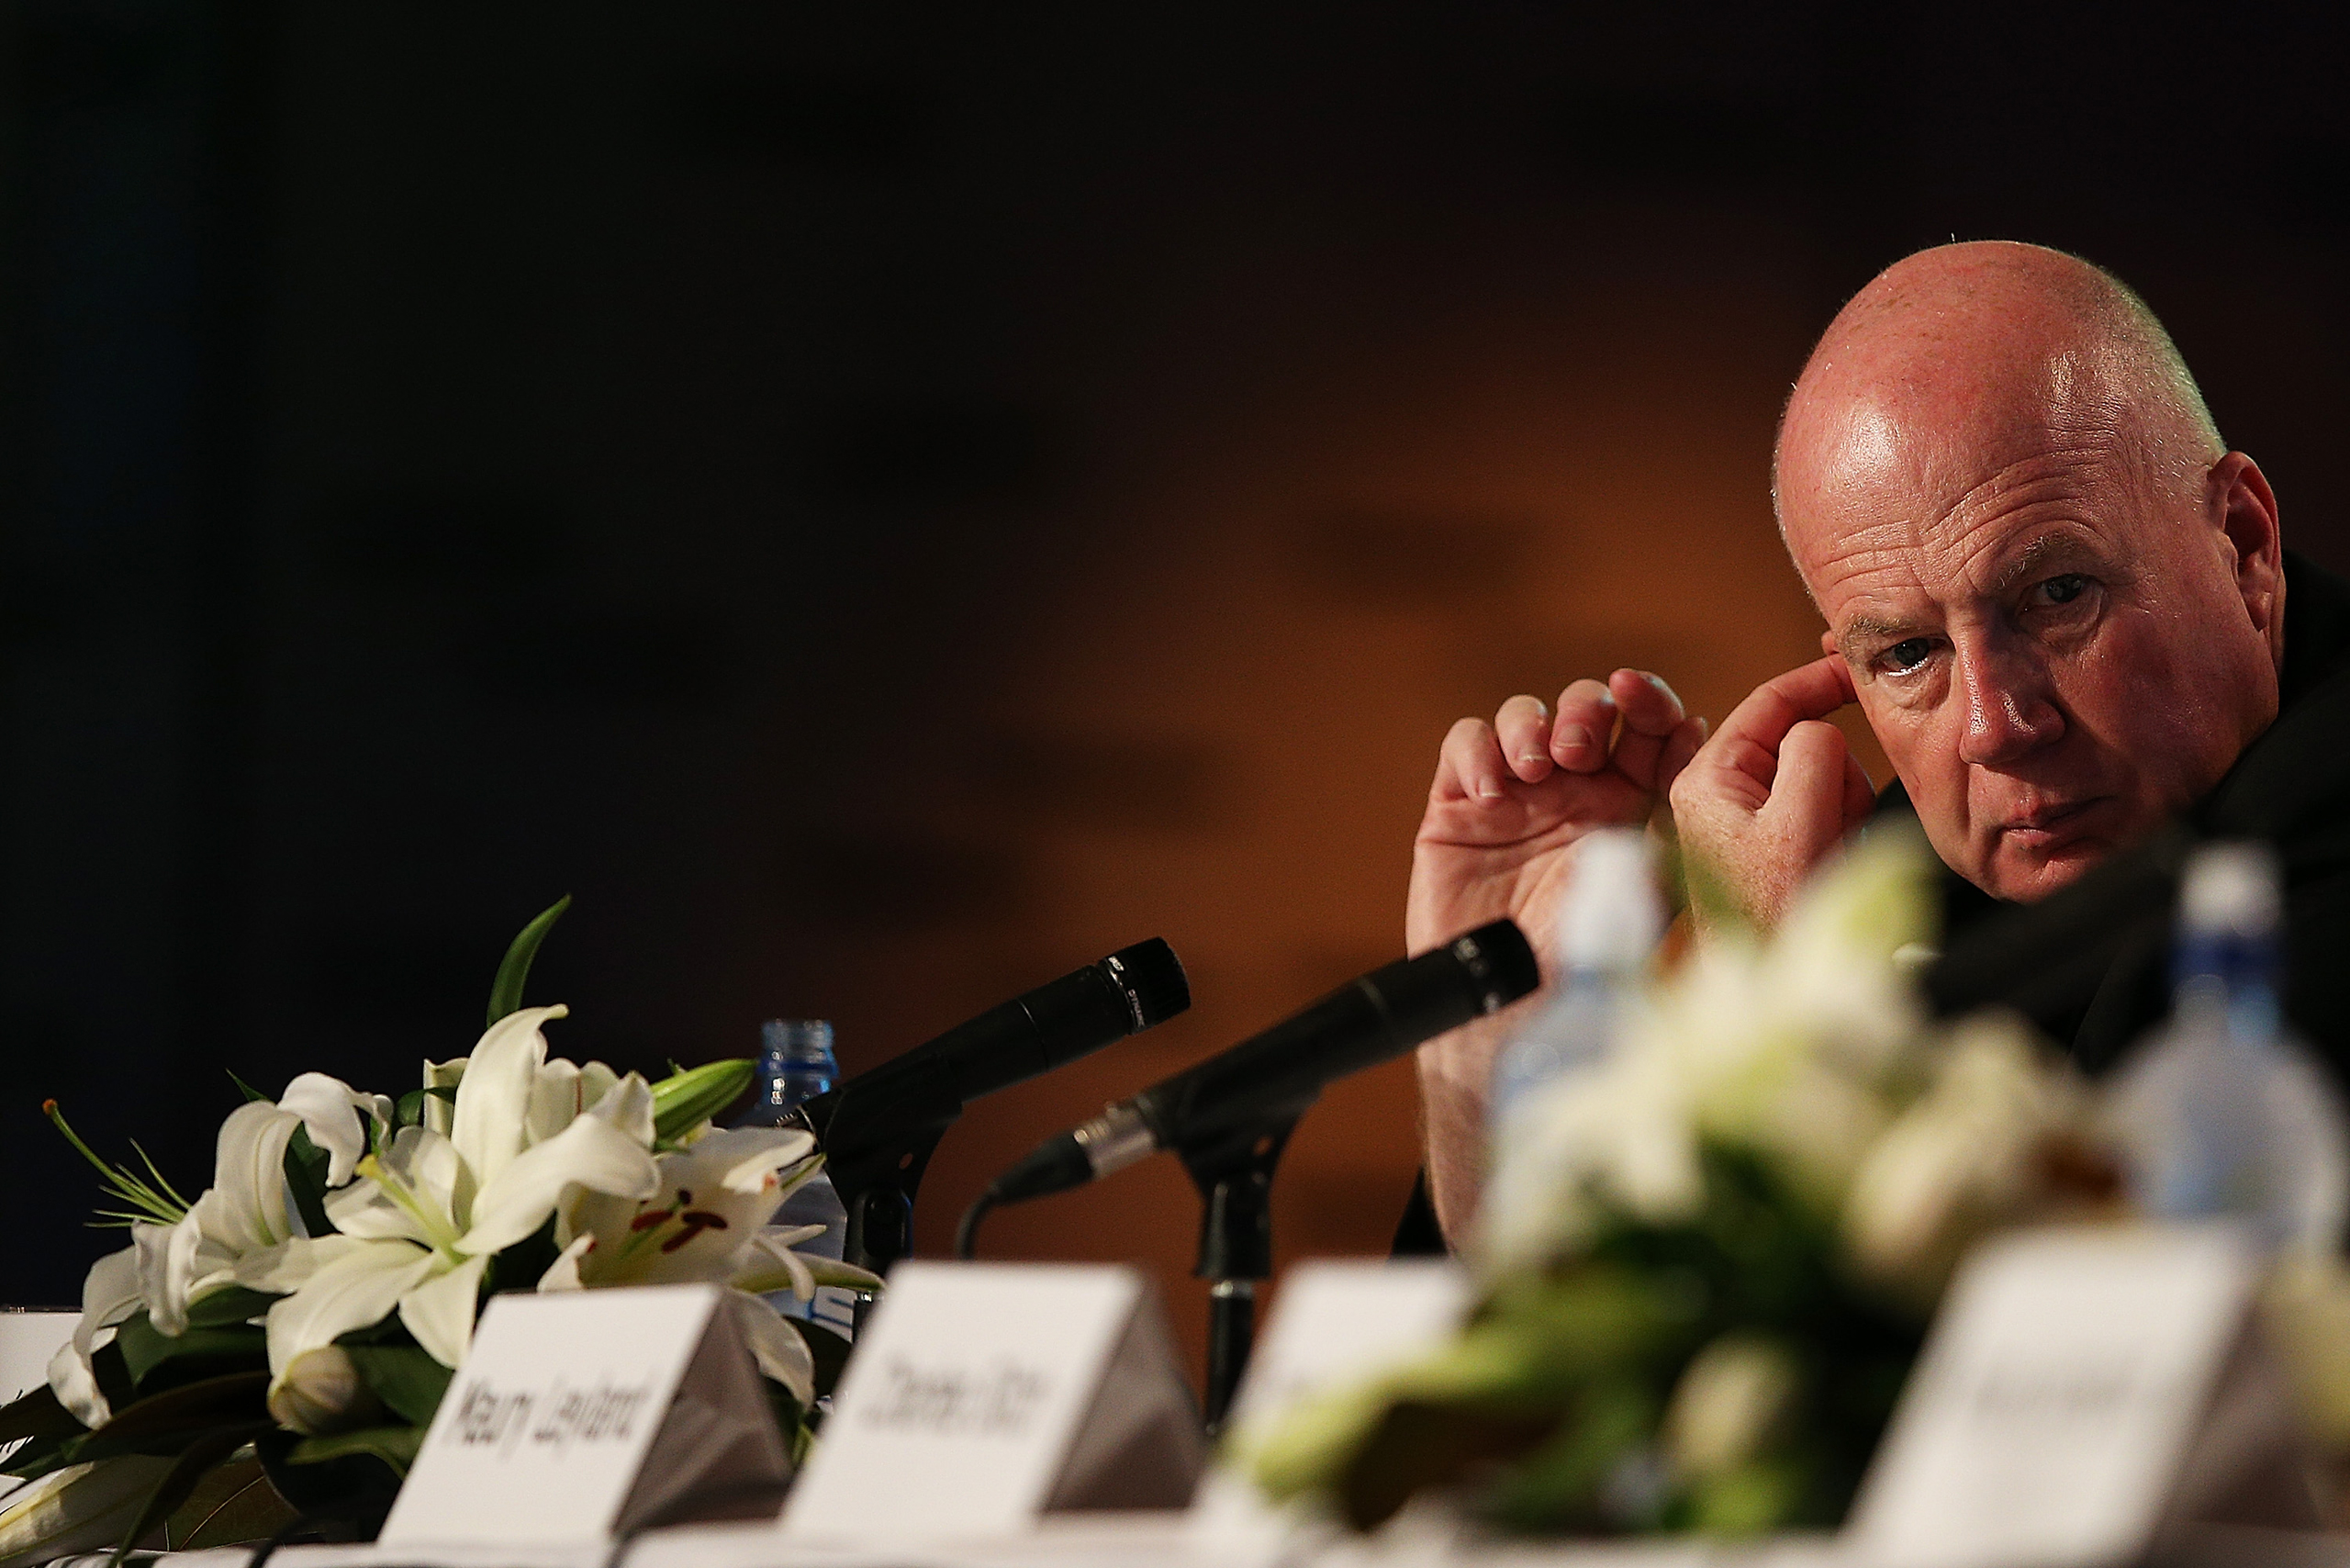 Board member Kevin Roberts attends the Telecom annual general meeting in Auckland, New Zealand on Sept. 28, 2012. (Hannah Peters—Getty Images)